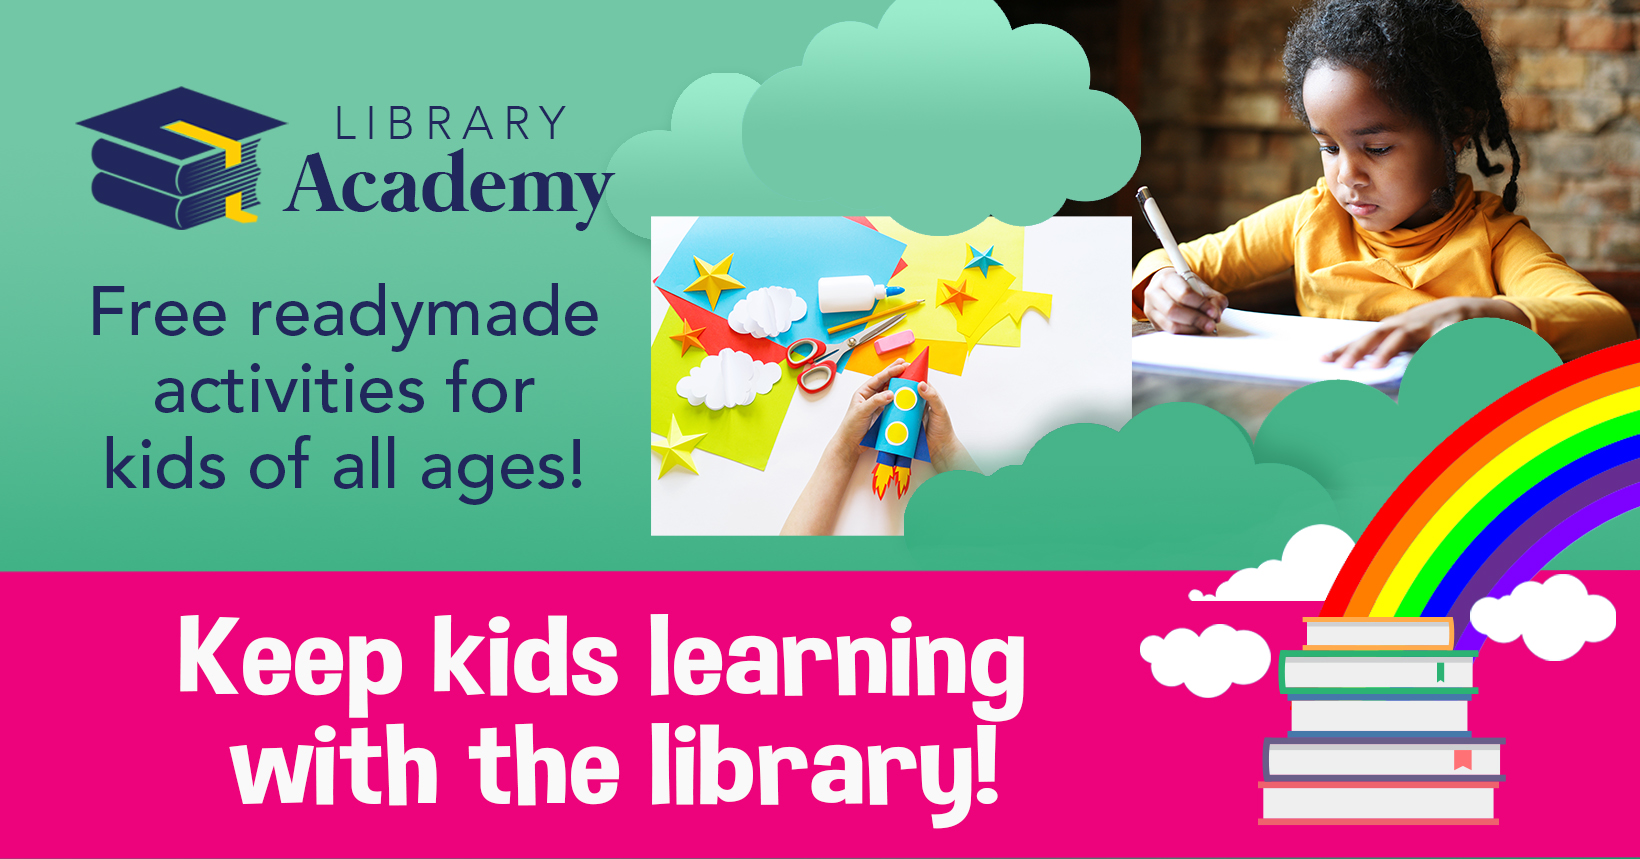 Library Academy Newsletter Sign Up